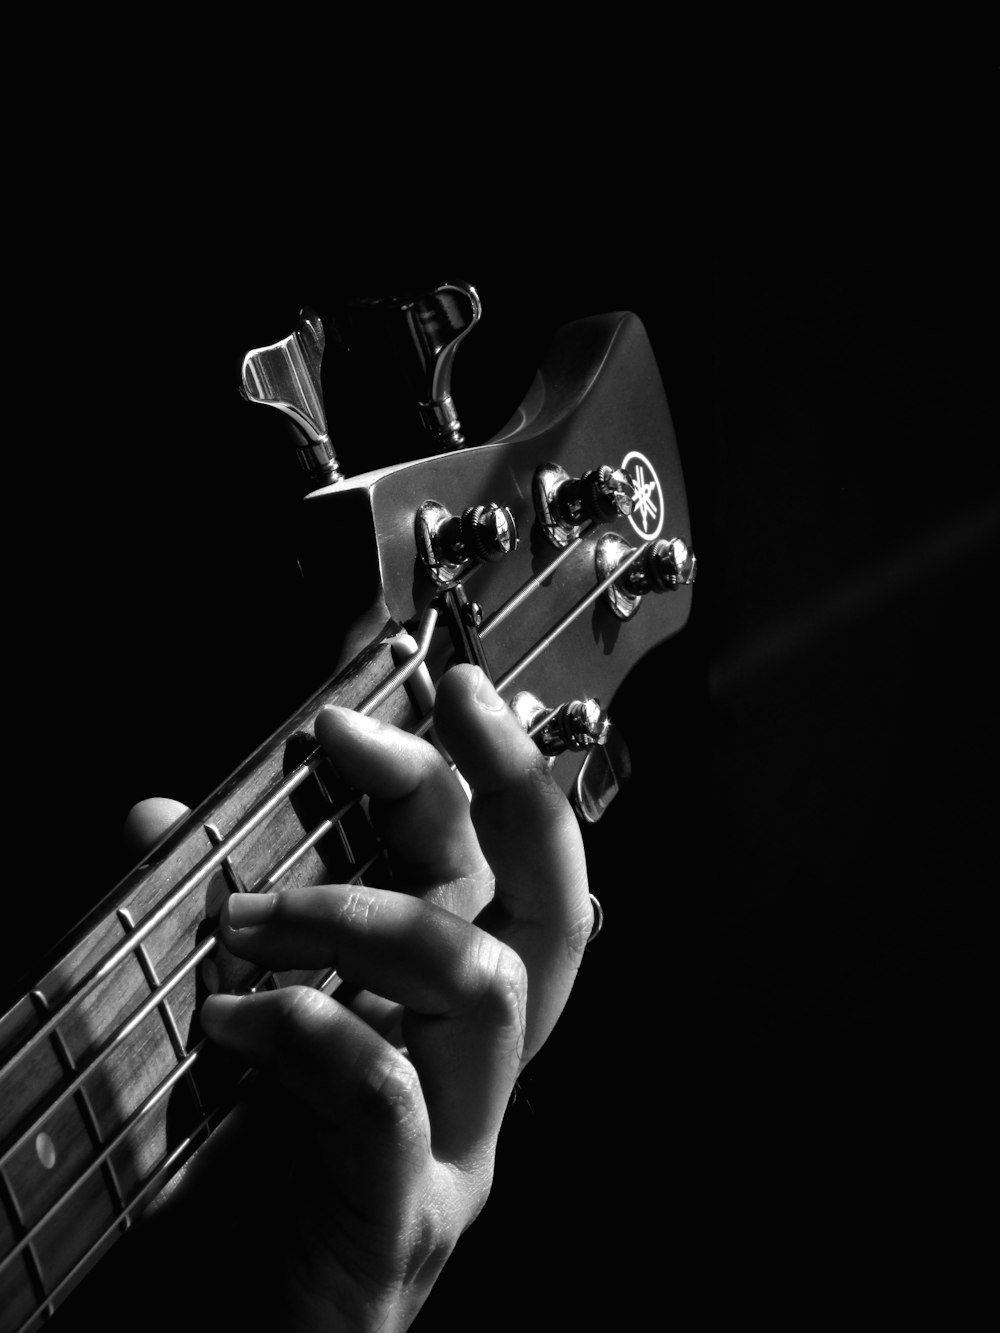 person playing guitar grayscale photo